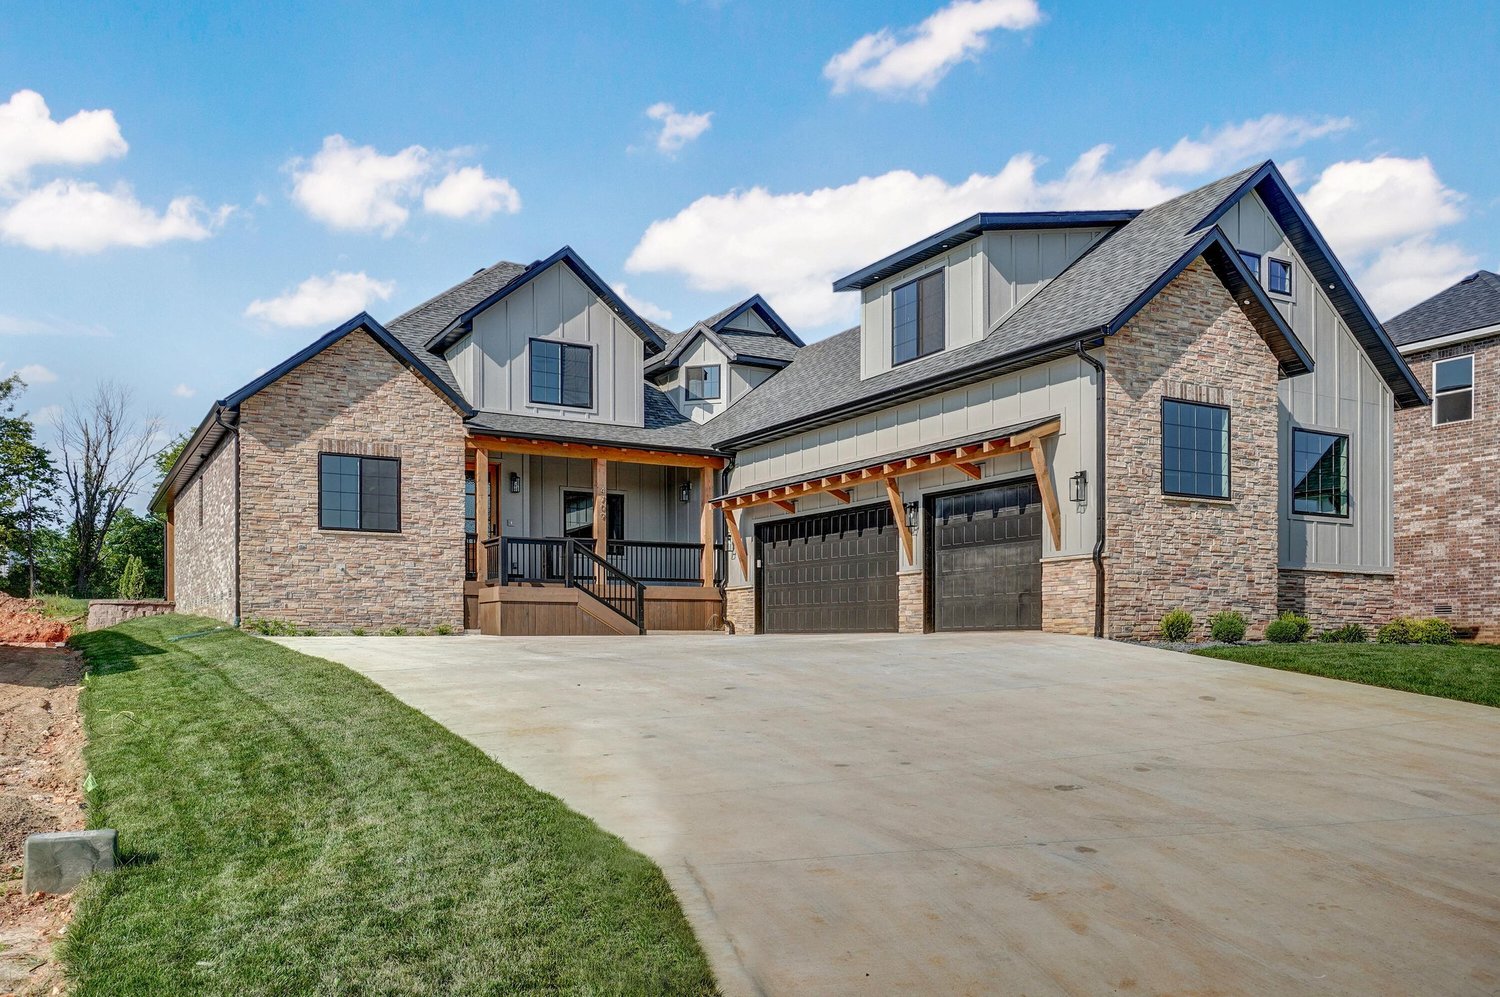 4709 E. Forest Trails Drive
$699,900
Bedrooms: 4
Bathrooms: 4
Listing firm: Keller Williams Greater Springfield